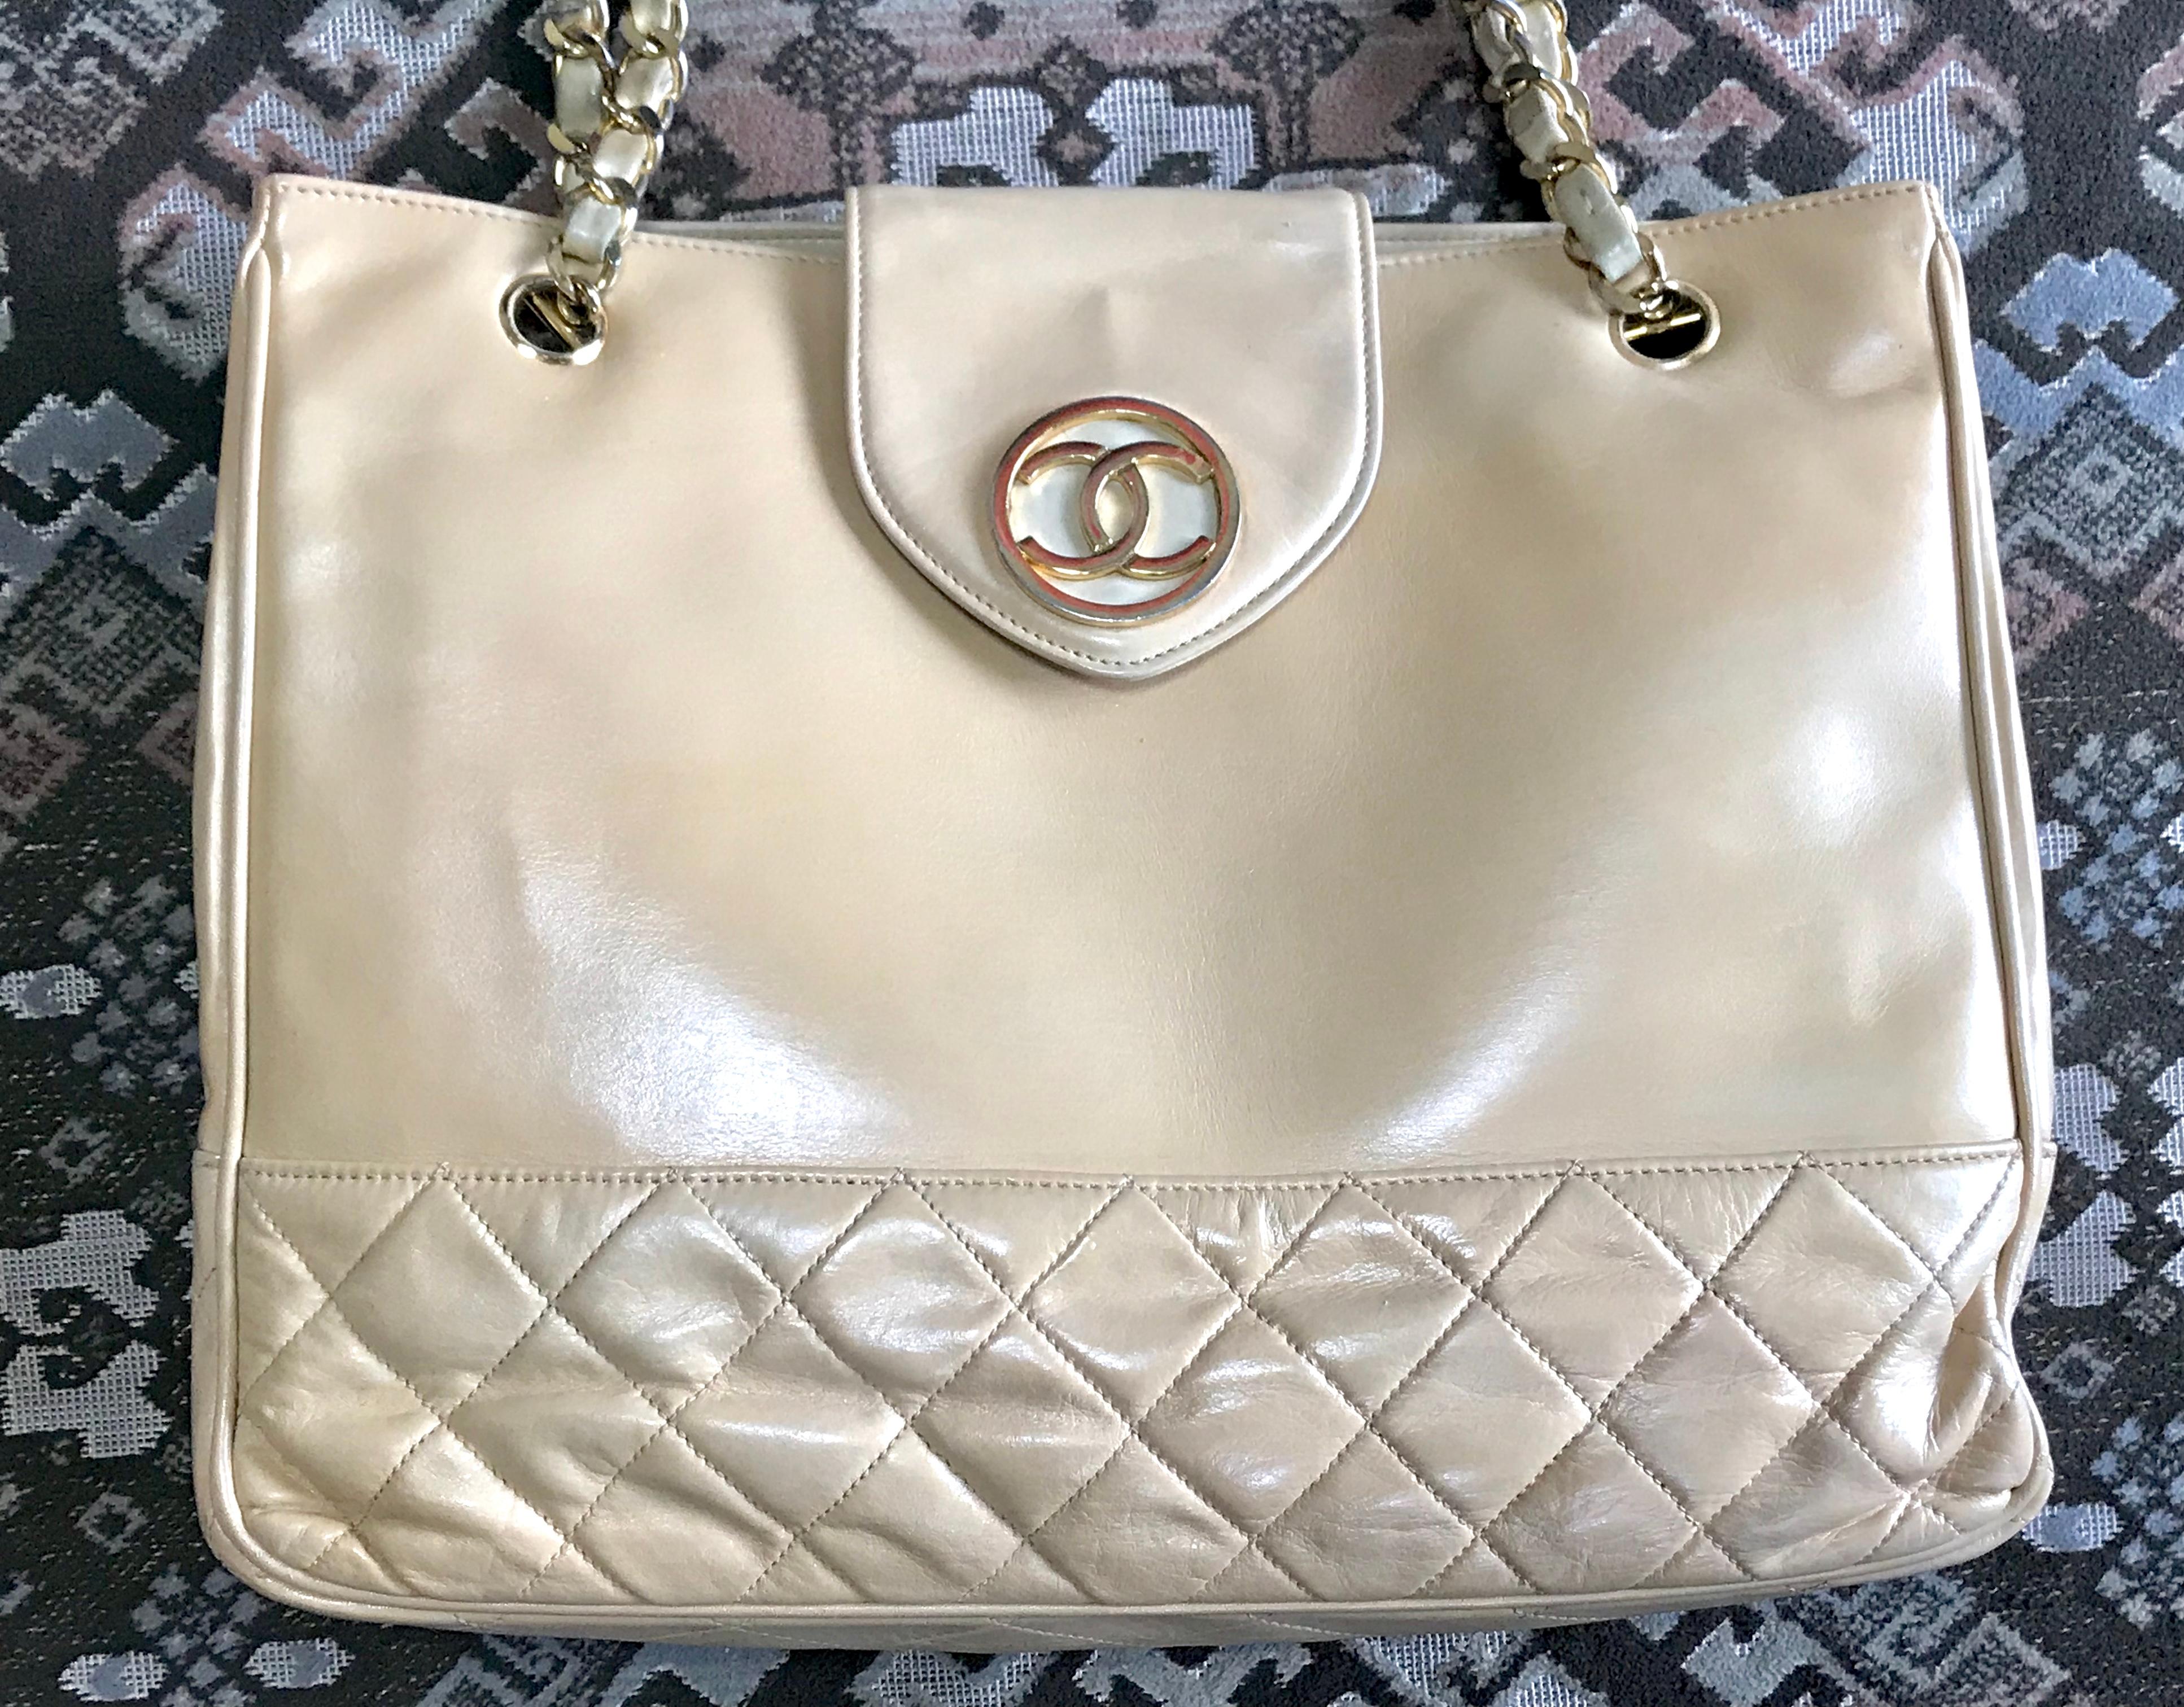 1990s. Vintage CHANEL beige calf leather large chain shoulder tote bag with golden CC mark motif at flap. Classic purse for daily use.

Introducing a vintage CHANEL beige leather large tote bag from the 90's.

Featuring its iconic gold tone large CC